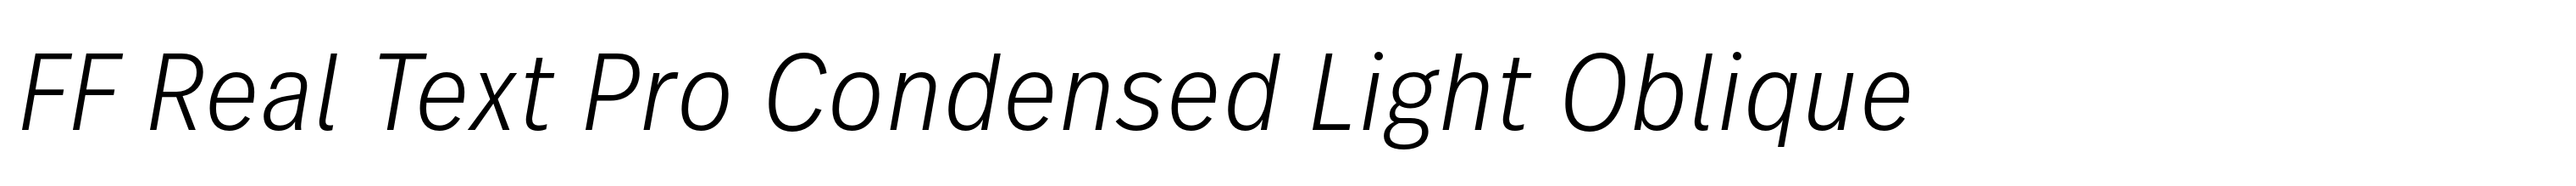 FF Real Text Pro Condensed Light Oblique